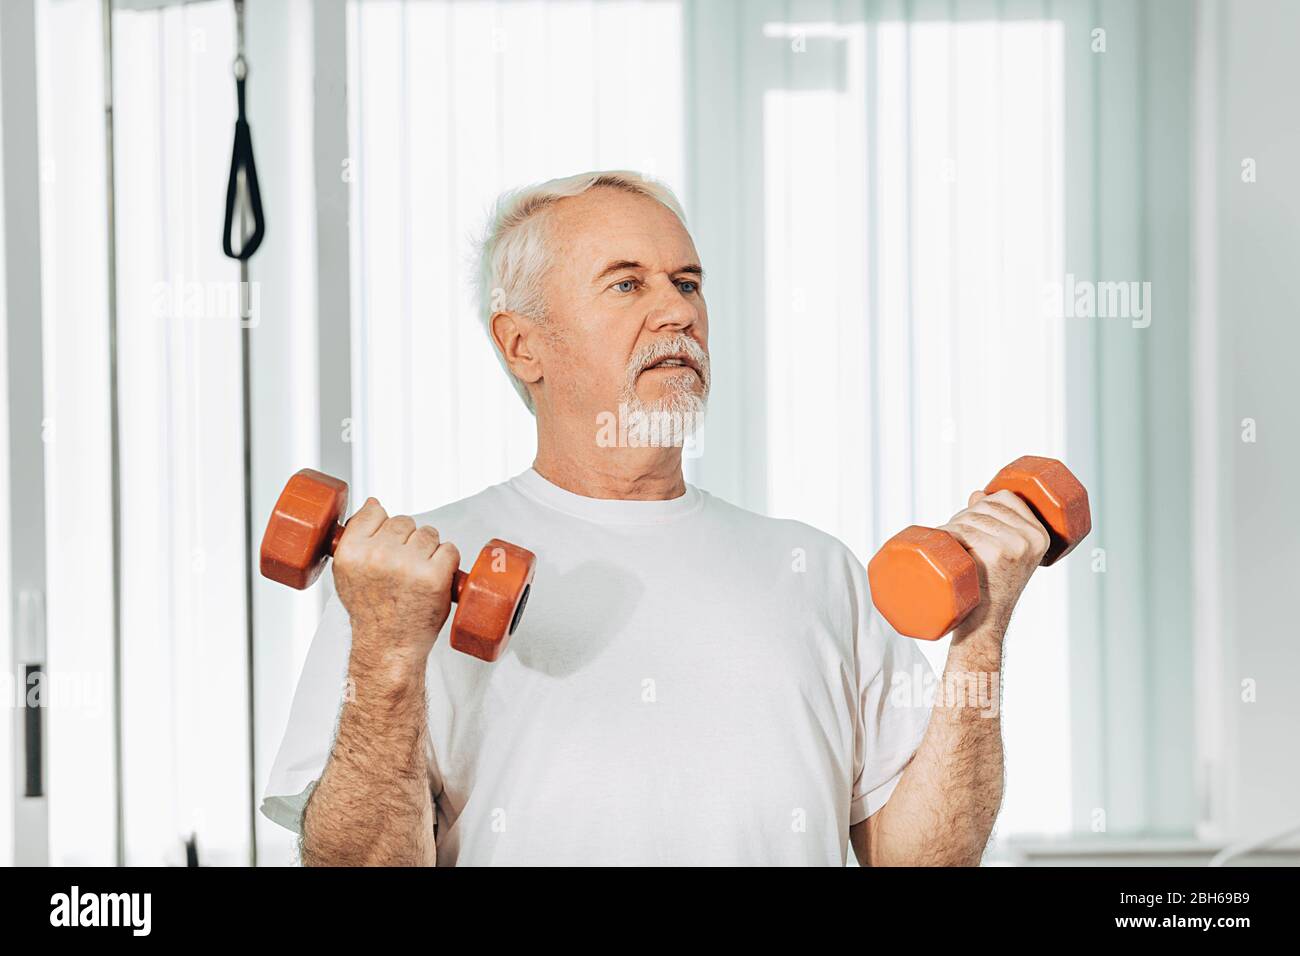 Senior man lifting weights at an exercise class. healthy lifestyle old people Stock Photo